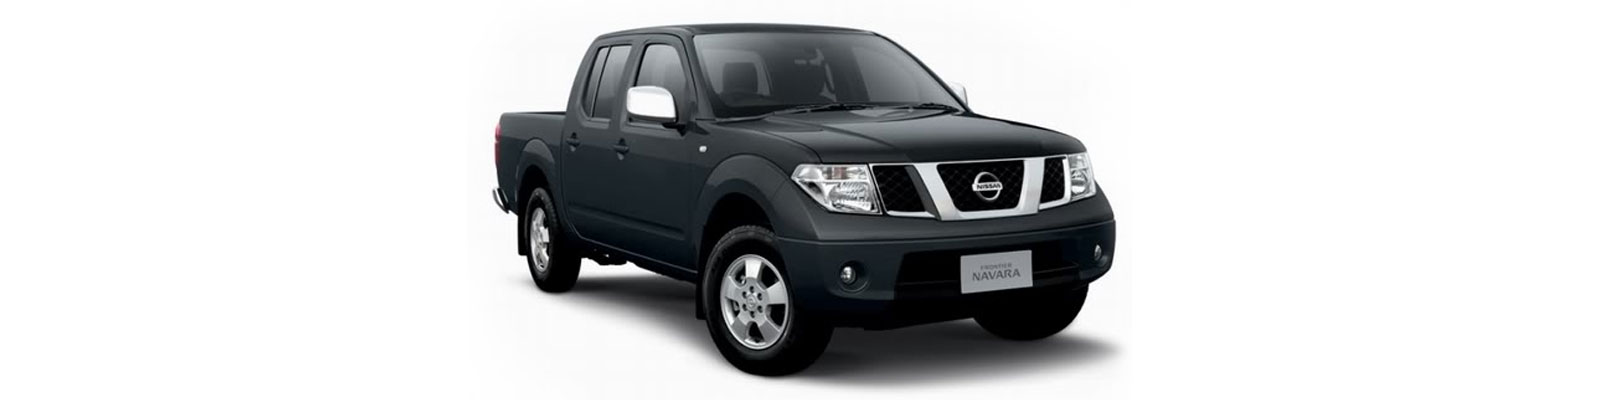 Accessories For Nissan D40 Navara Double Cab From 2005 To 2010